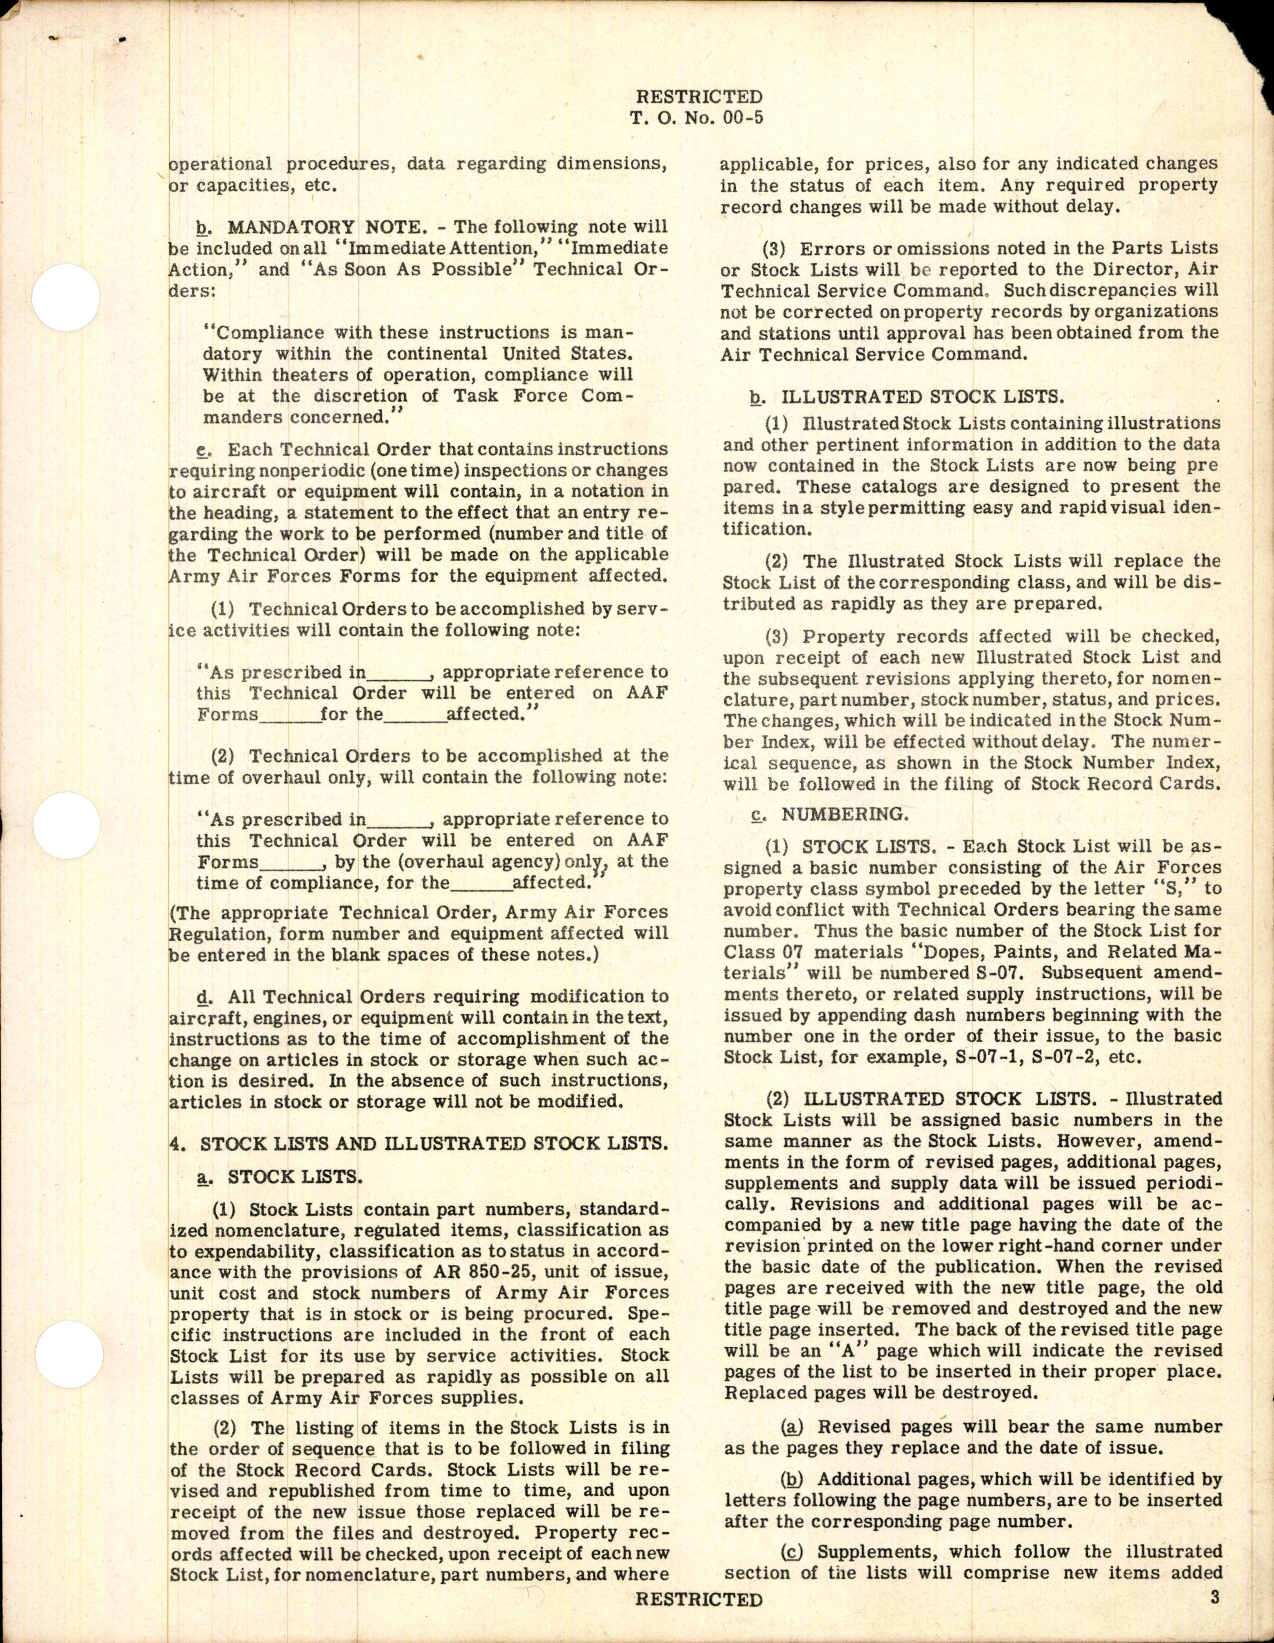 Sample page 3 from AirCorps Library document: Explanation of Technical Order and Stock List System